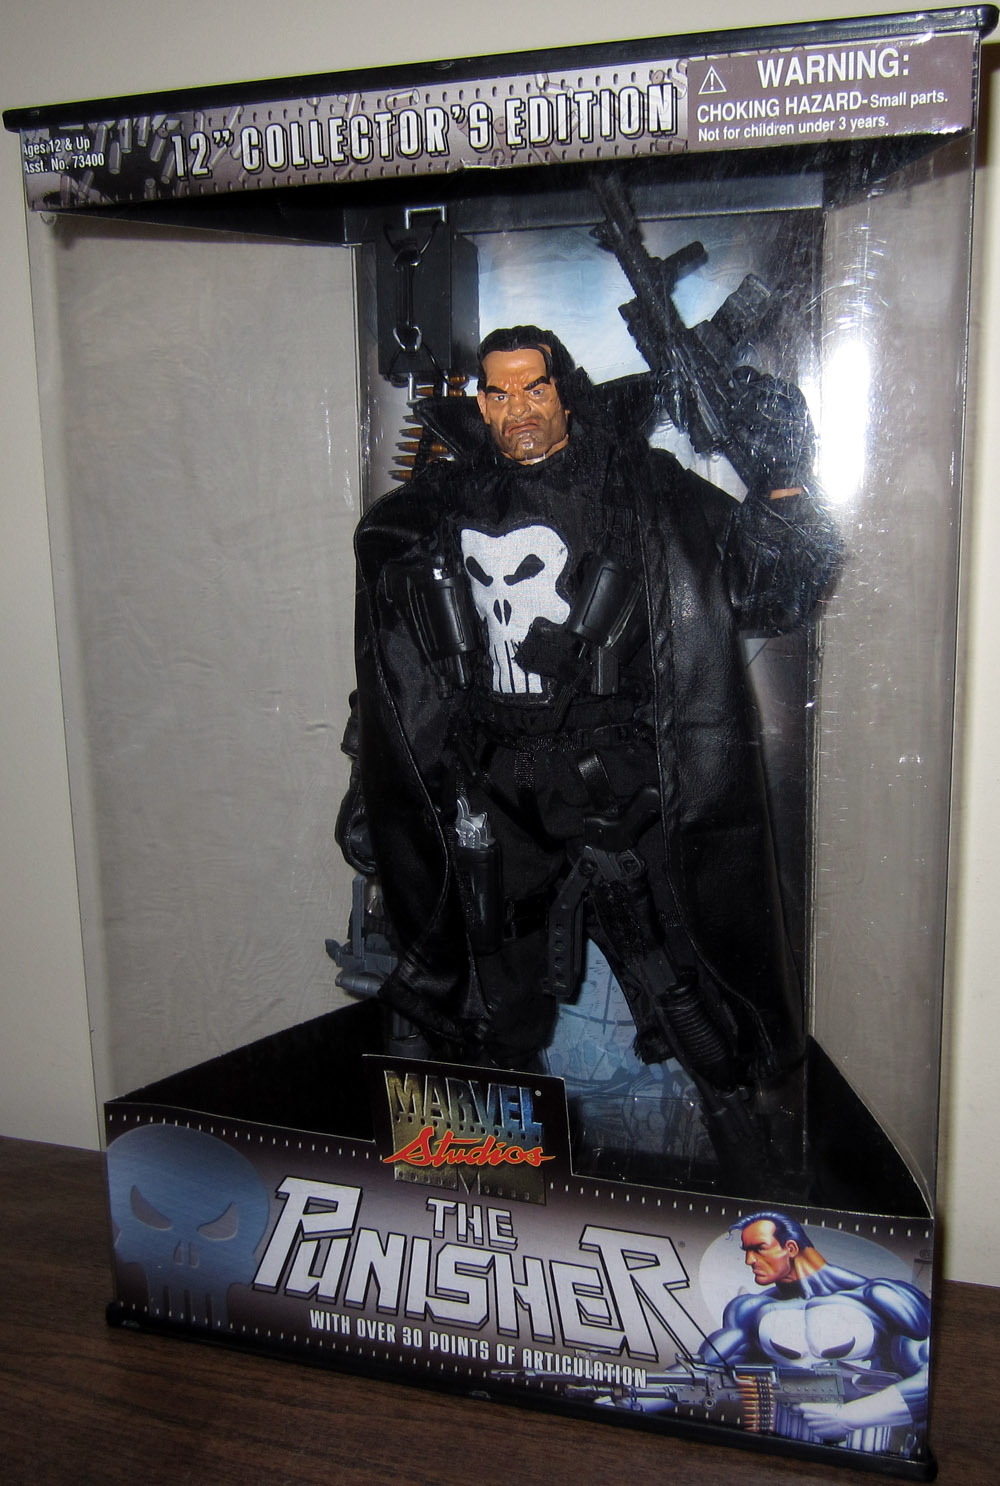 12 Inch Collectors Edition Punisher Marvel Studios action